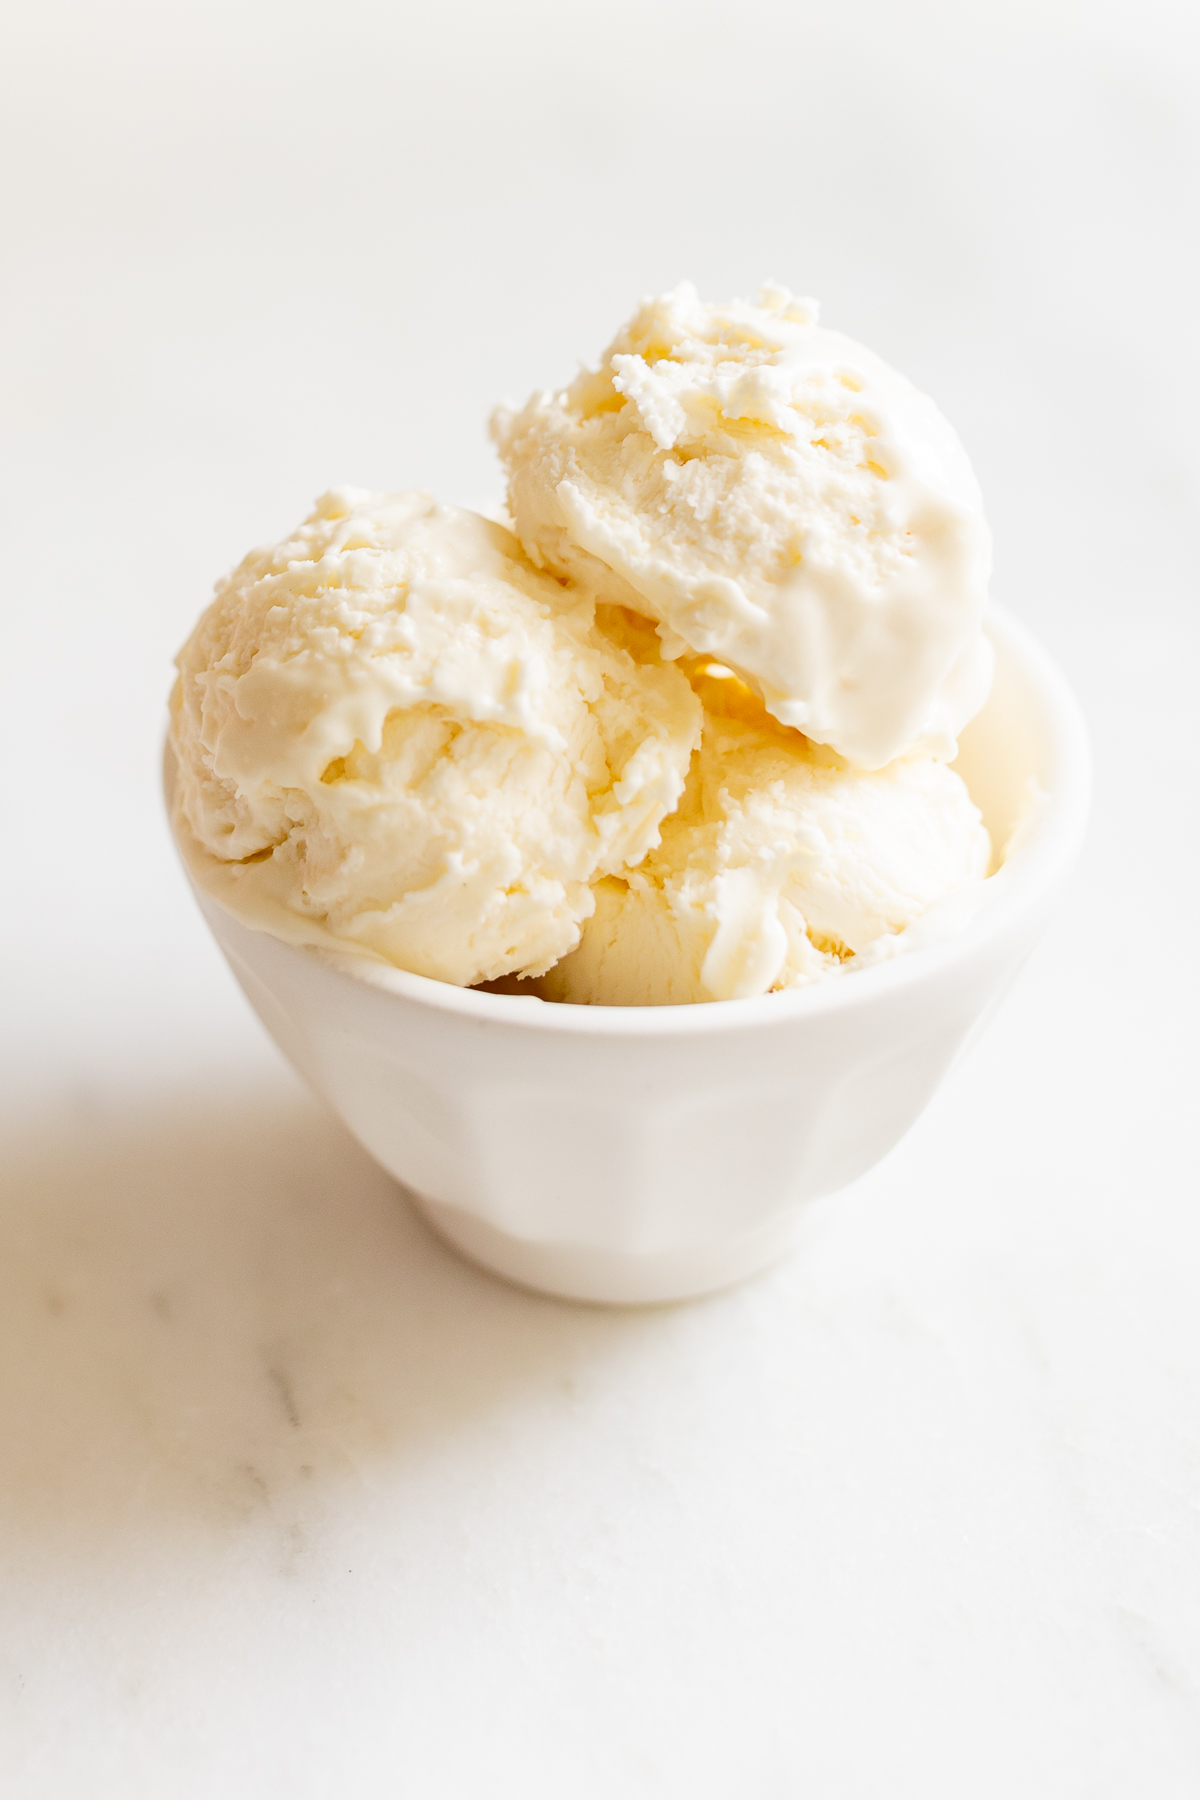 condensed milk ice cream in a white bowl on a marble countertop